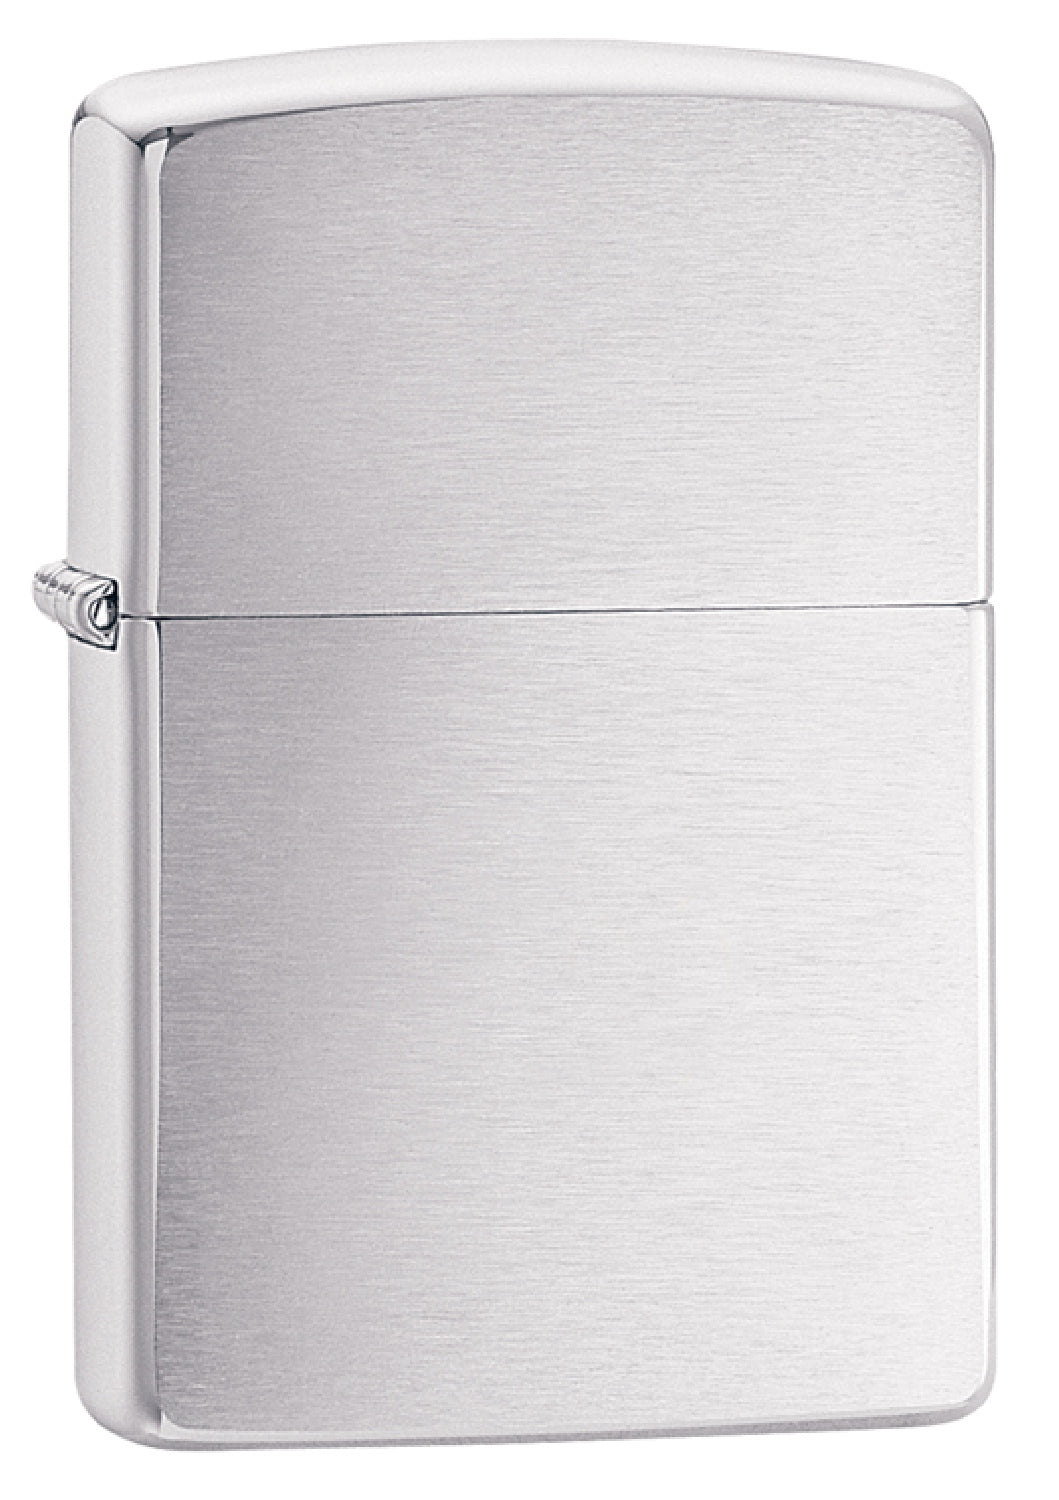 Zippo Classic Brushed Chrome Windproof Flame Lighter